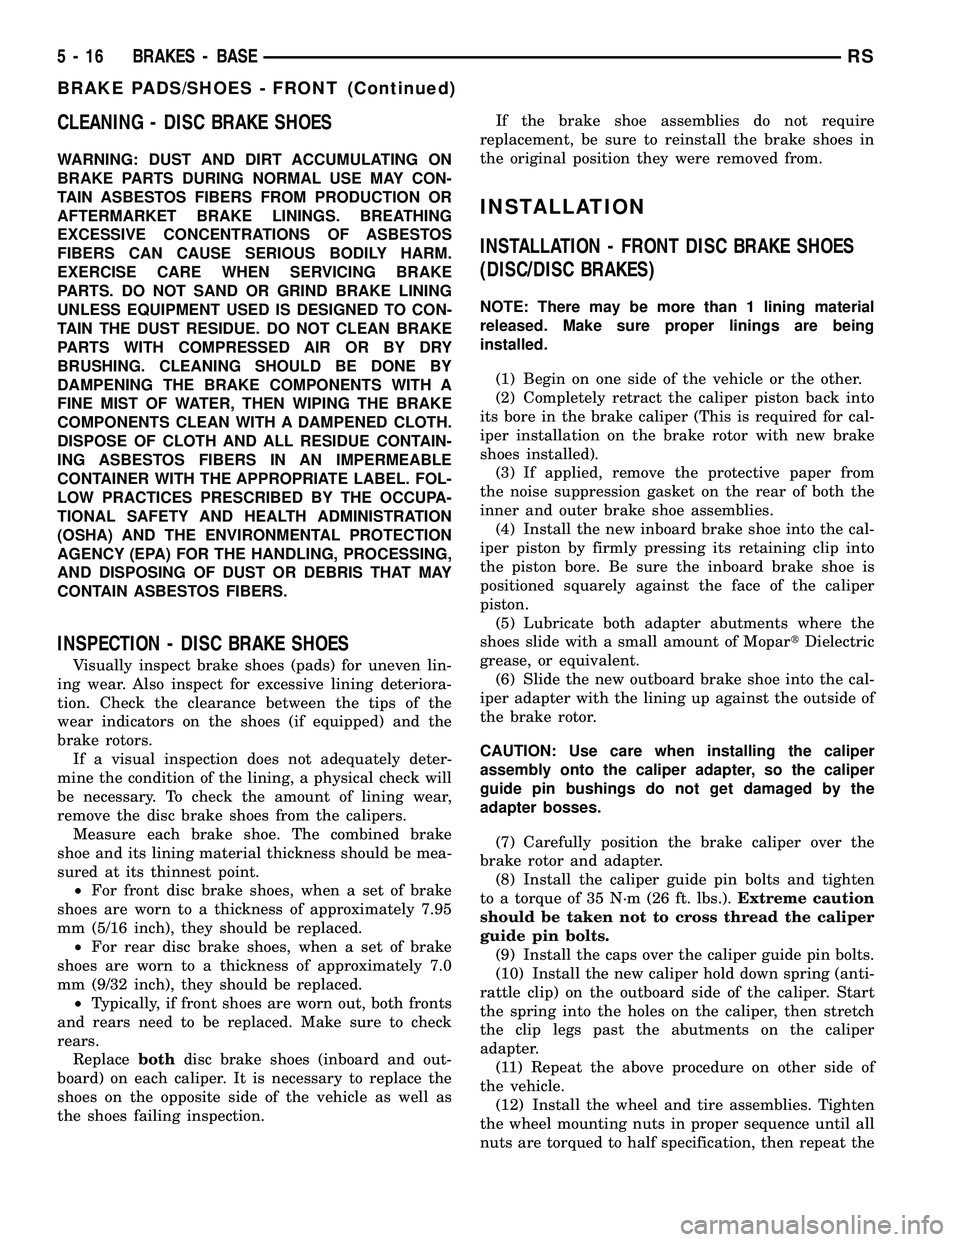 DODGE TOWN AND COUNTRY 2004  Service Manual CLEANING - DISC BRAKE SHOES
WARNING: DUST AND DIRT ACCUMULATING ON
BRAKE PARTS DURING NORMAL USE MAY CON-
TAIN ASBESTOS FIBERS FROM PRODUCTION OR
AFTERMARKET BRAKE LININGS. BREATHING
EXCESSIVE CONCENT